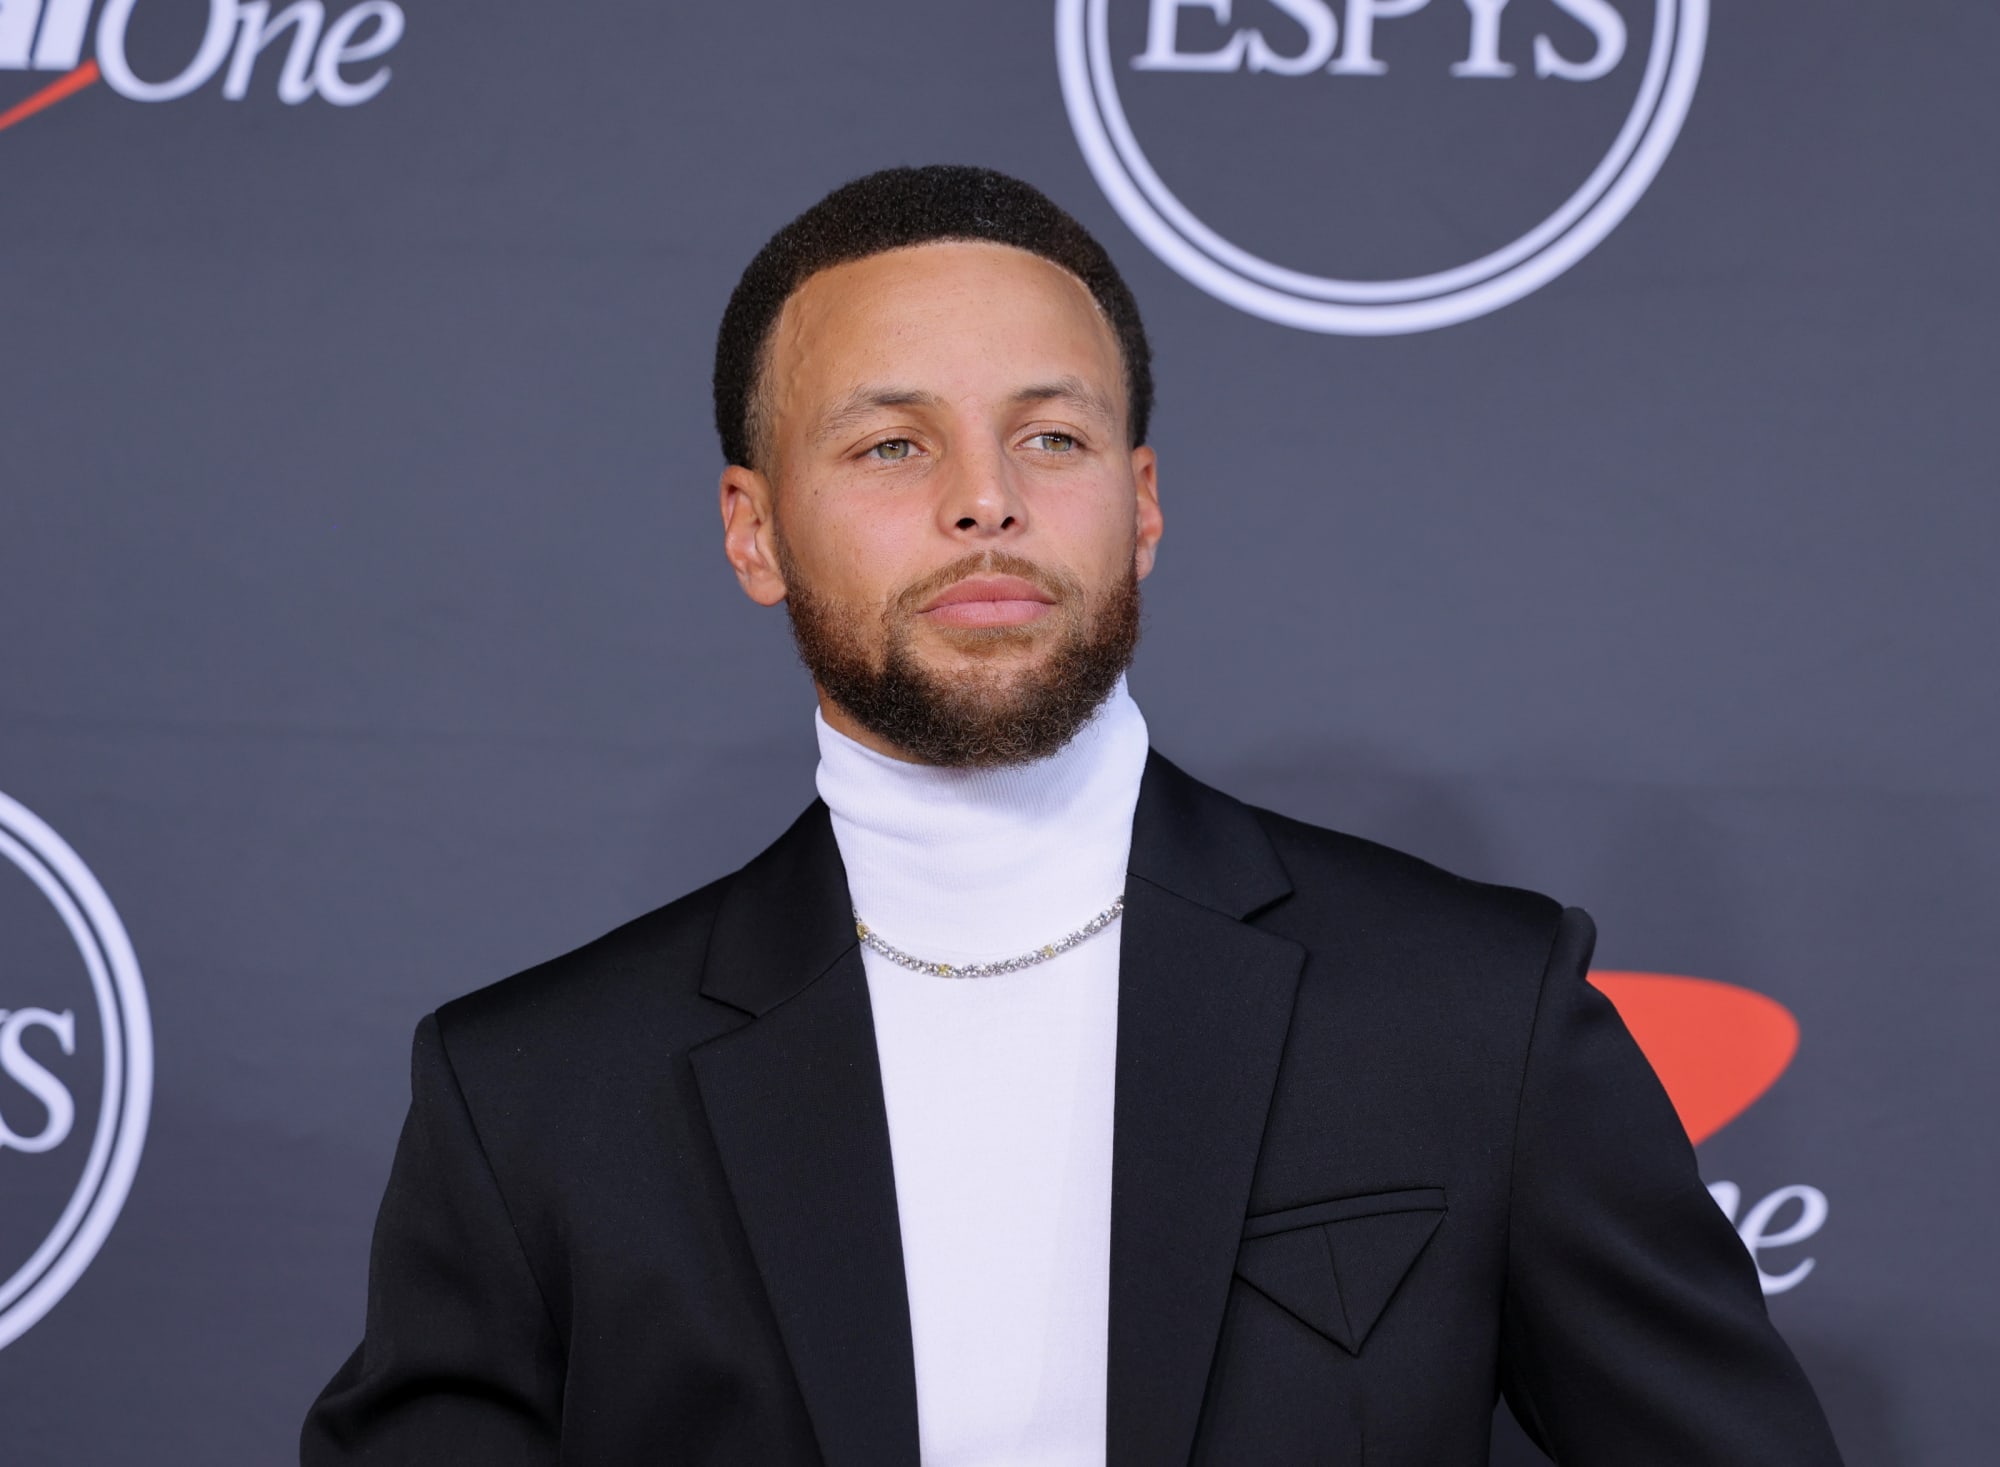 Steph Curry makes use of Rams to take a shot at ‘previous’ Lakers as ESPYs host